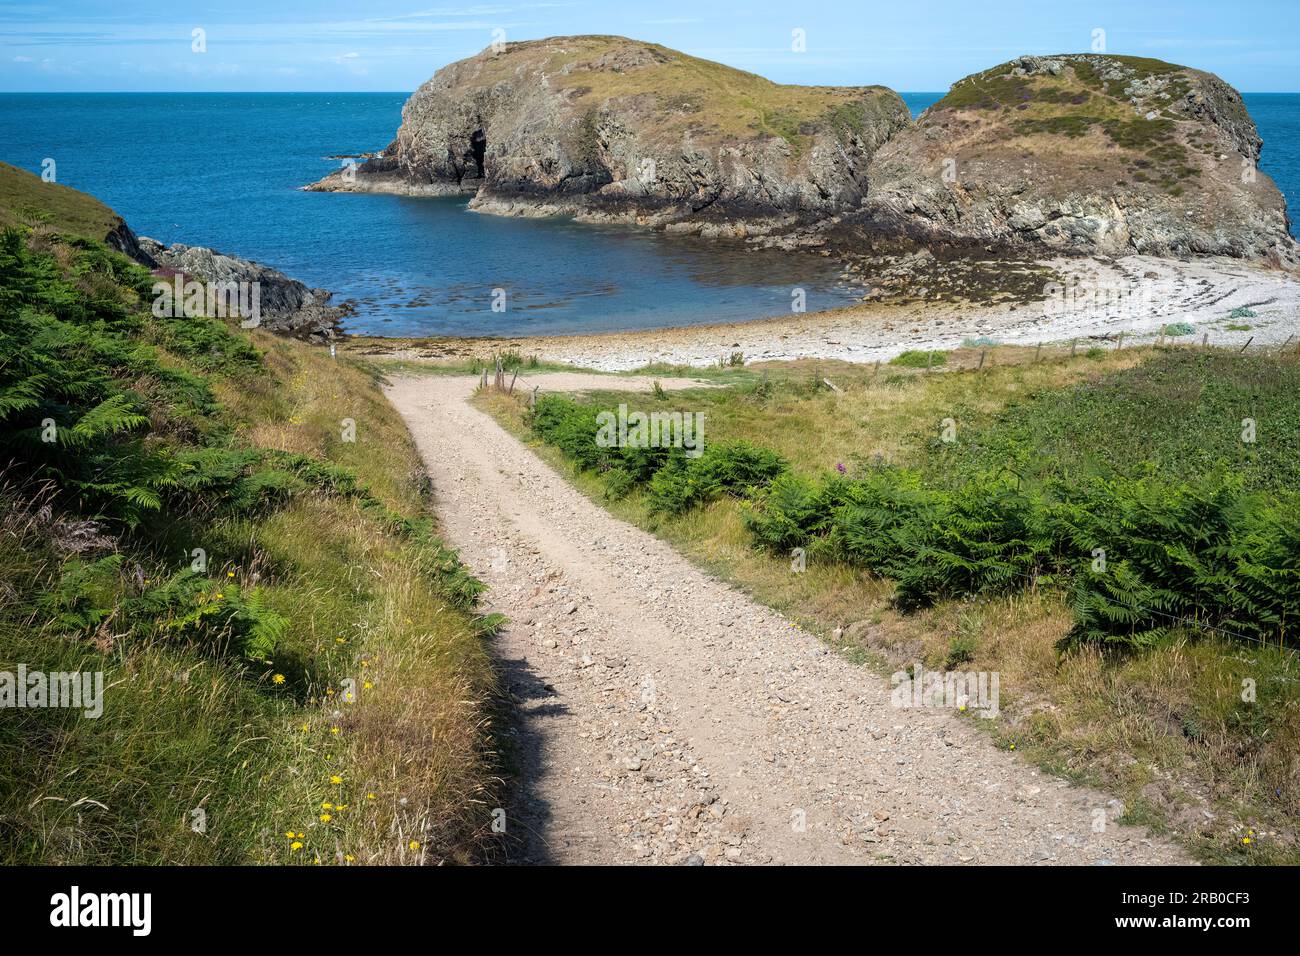 The secluded beach and tidal island of Ynys y Fydlyn on the NW coast of Anglesey, Wales, UK Stock Photo